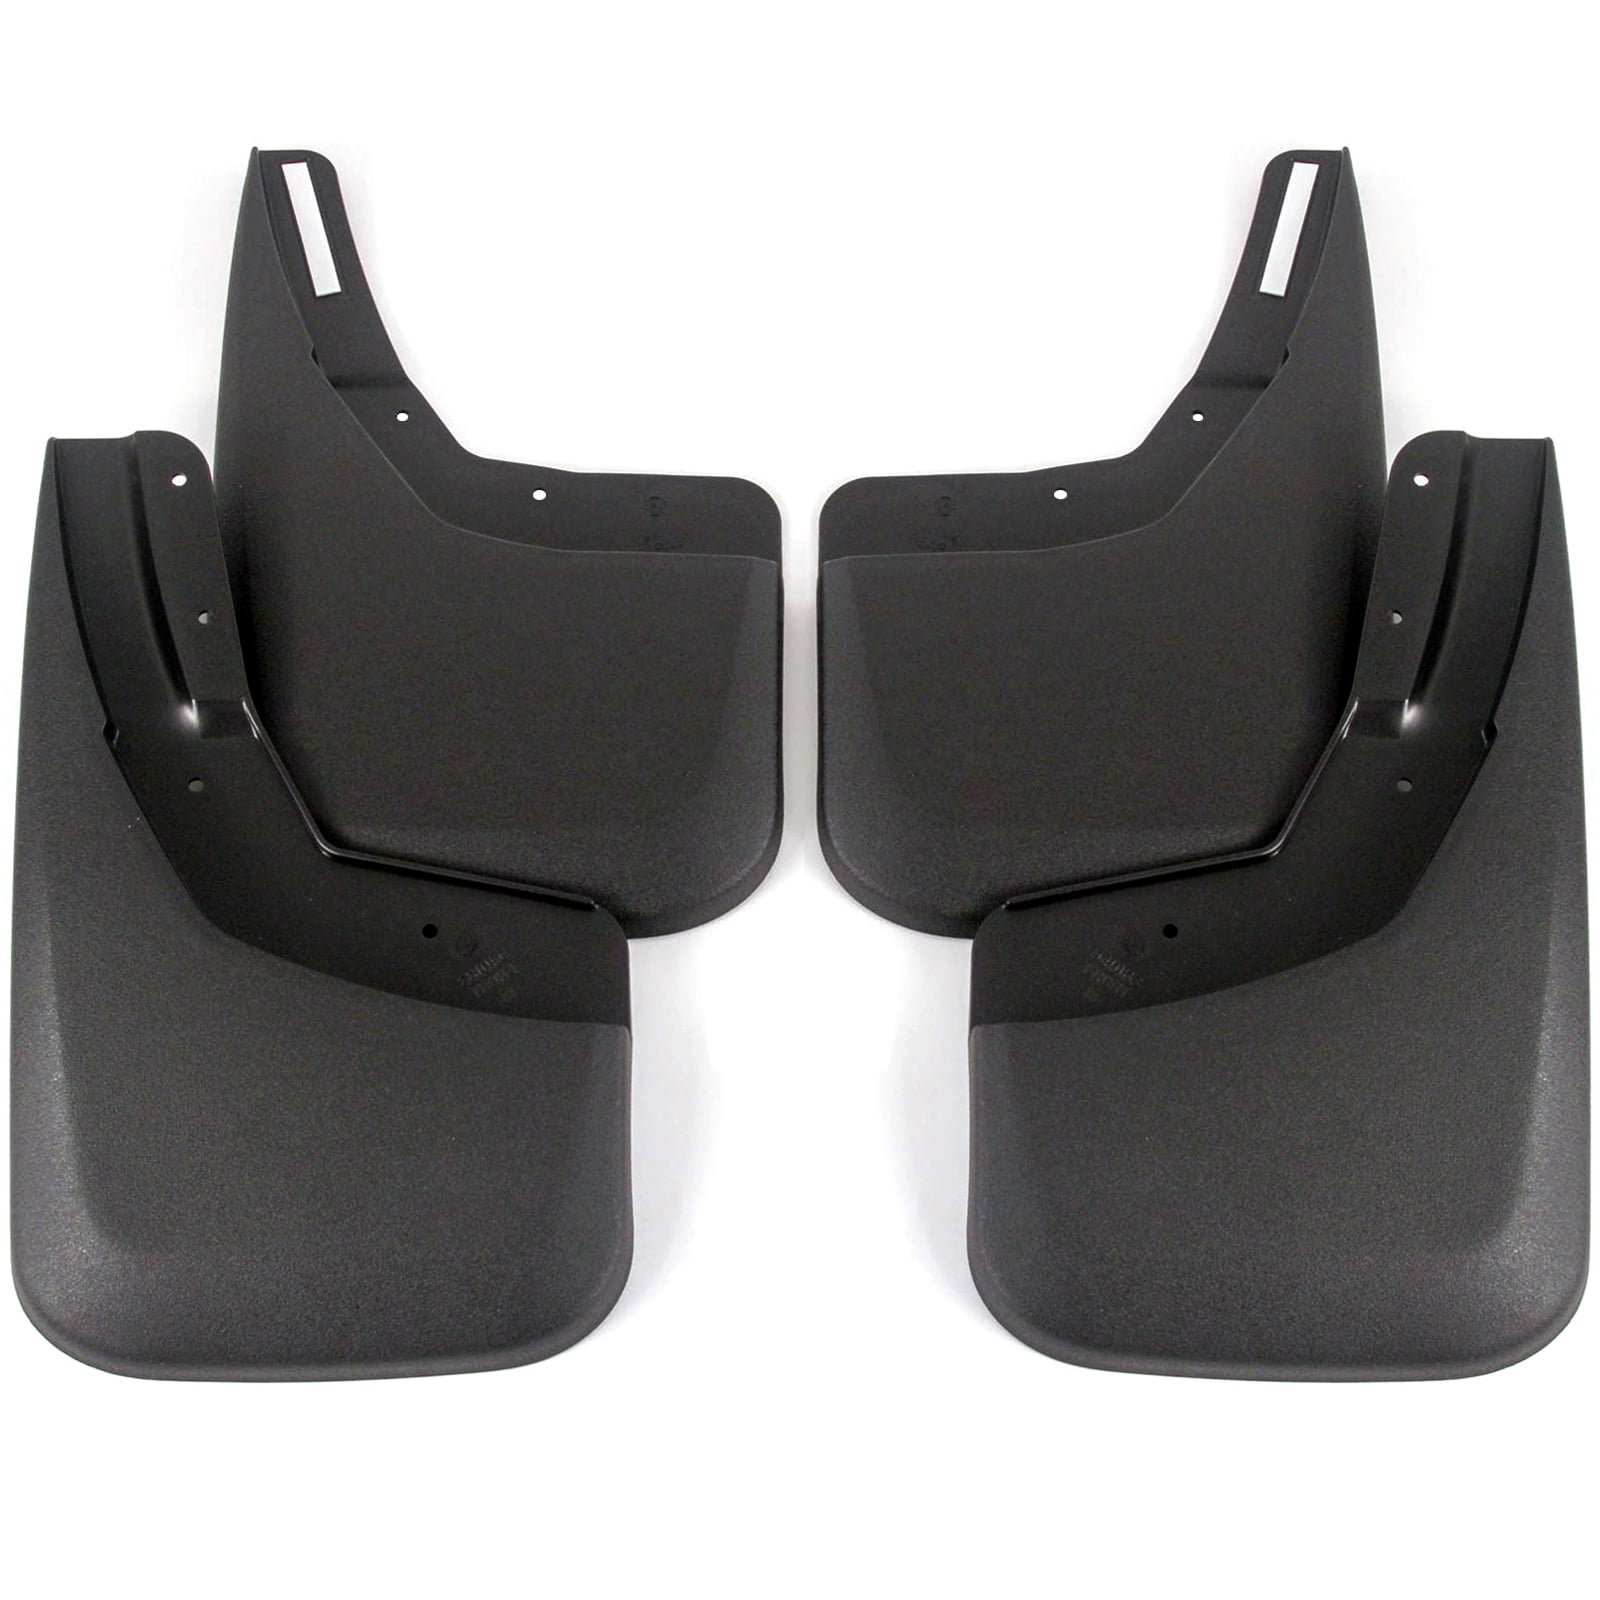 Mud Guards 4pc Custom Fits Chevy Silverado 2007-2013 Flaps Extra Long Front Rear